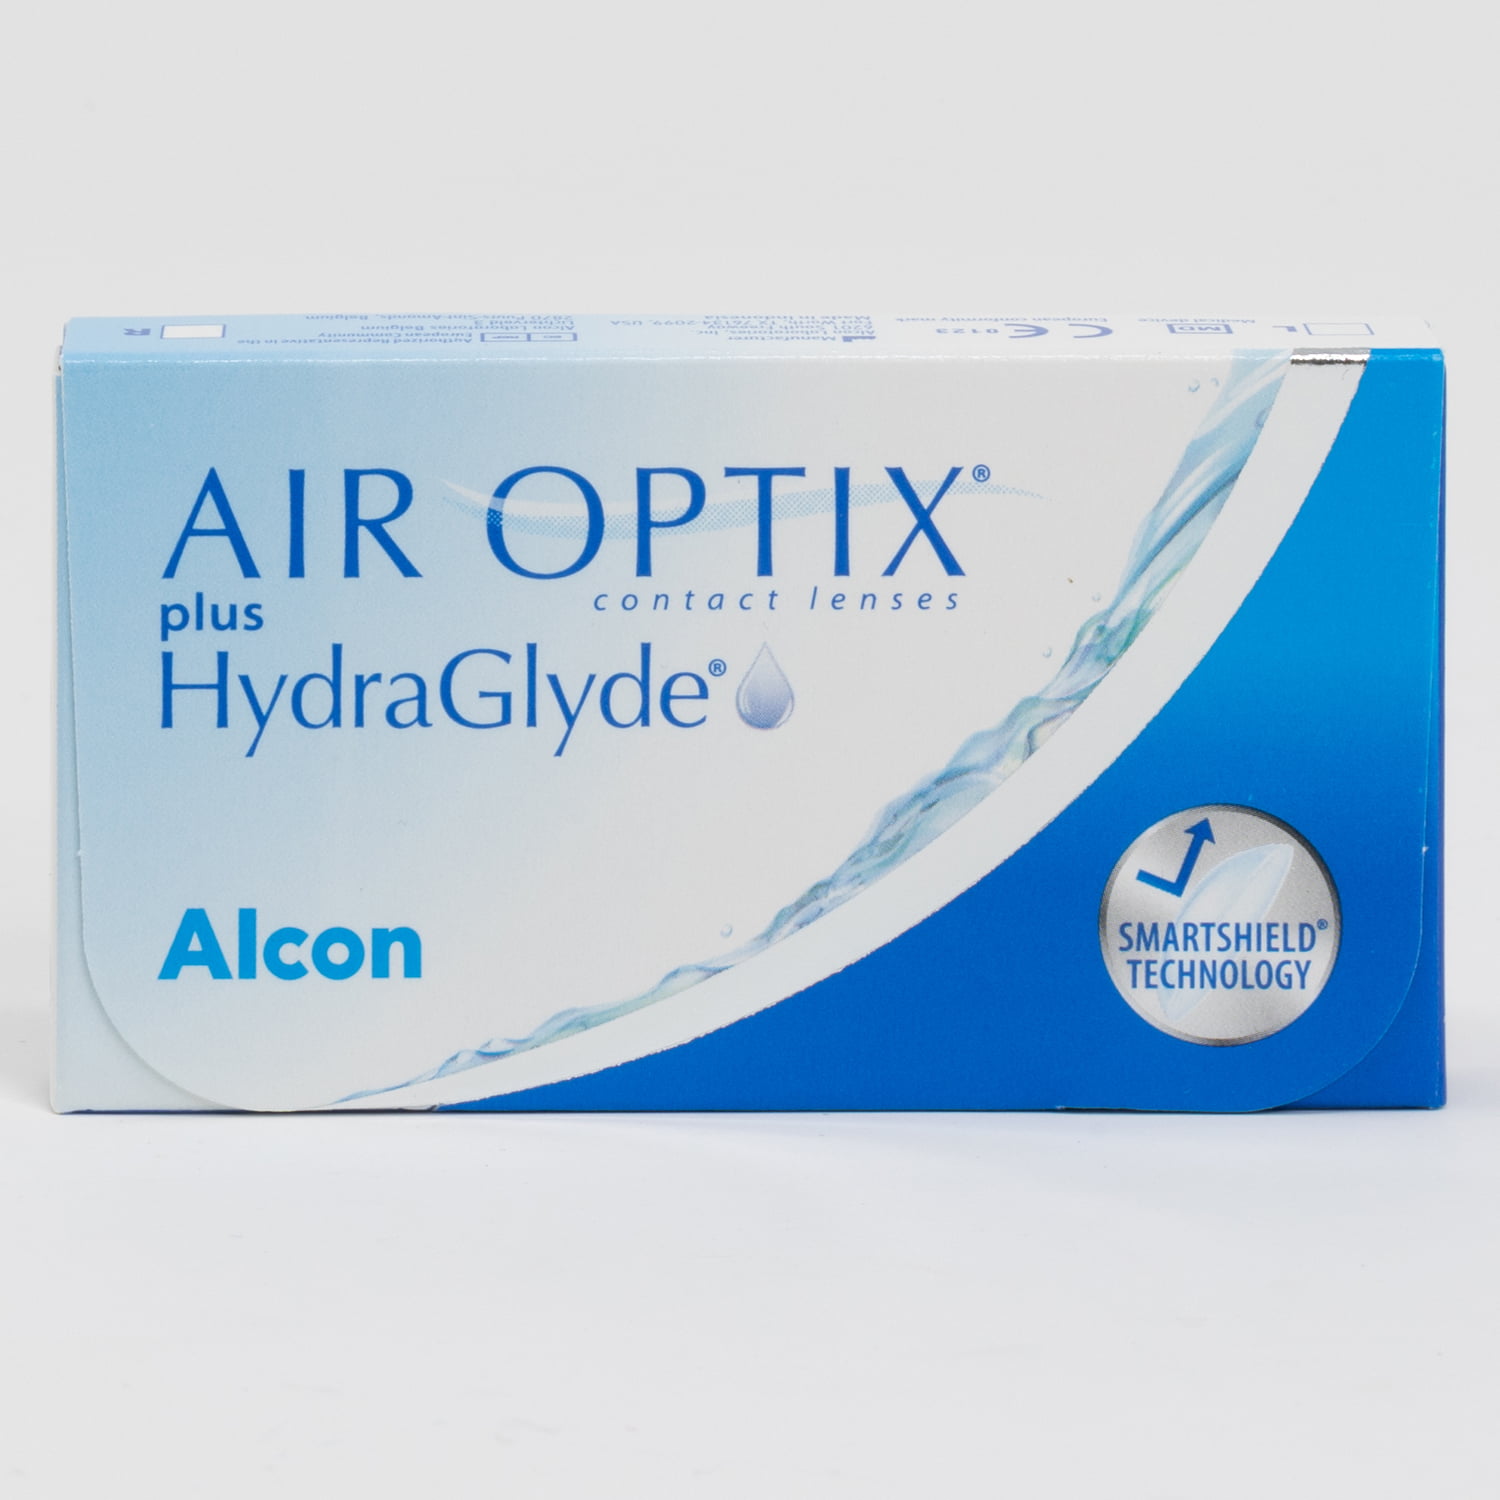 air-optix-plus-hydraglyde-6-pack-deliver-contacts